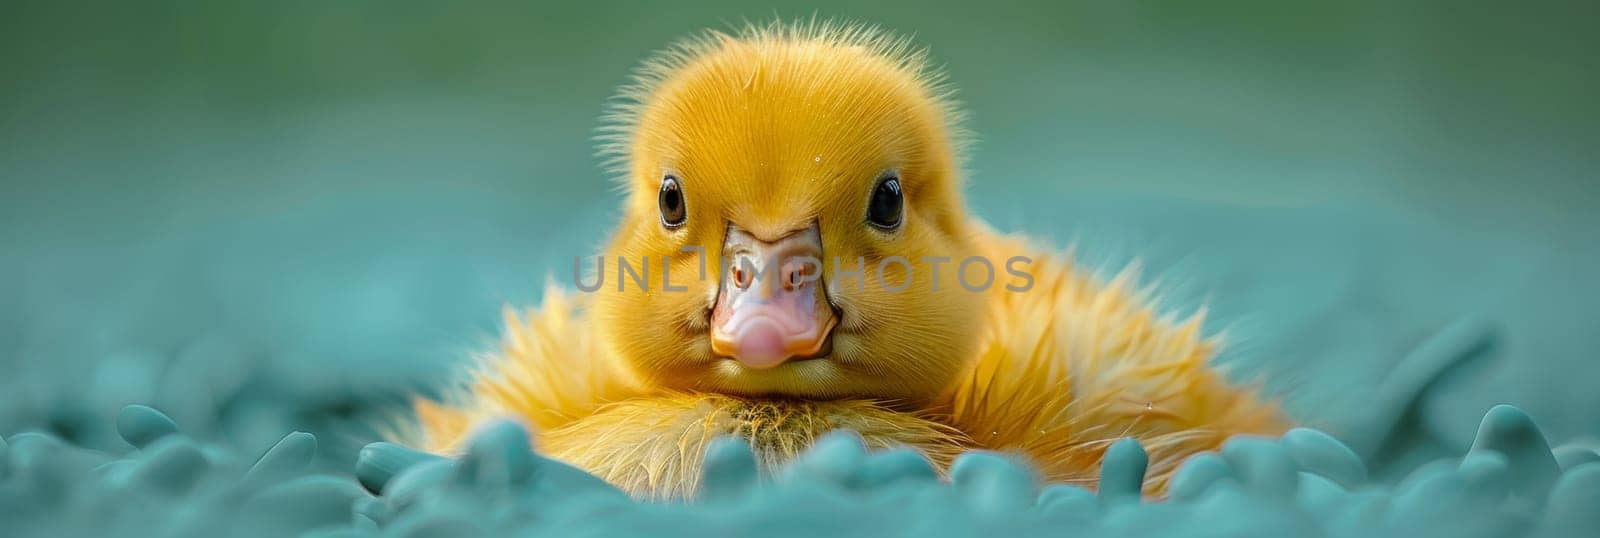 A close up of a duckling with its head sticking out